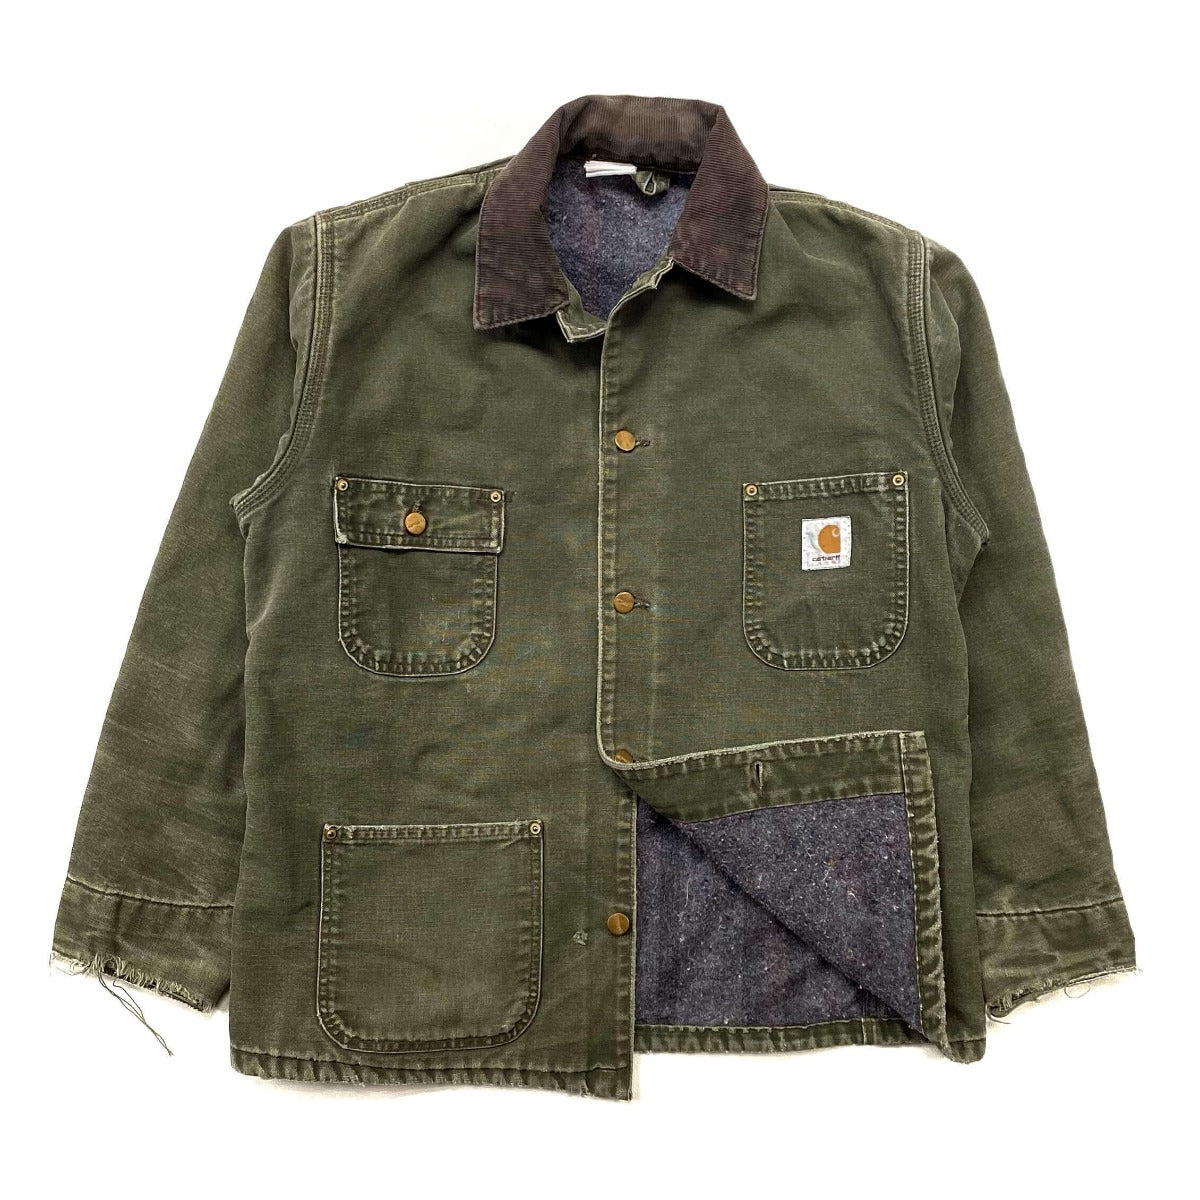 Shop The Thirty-First Co. Curated Carhartt Workwear Apparel